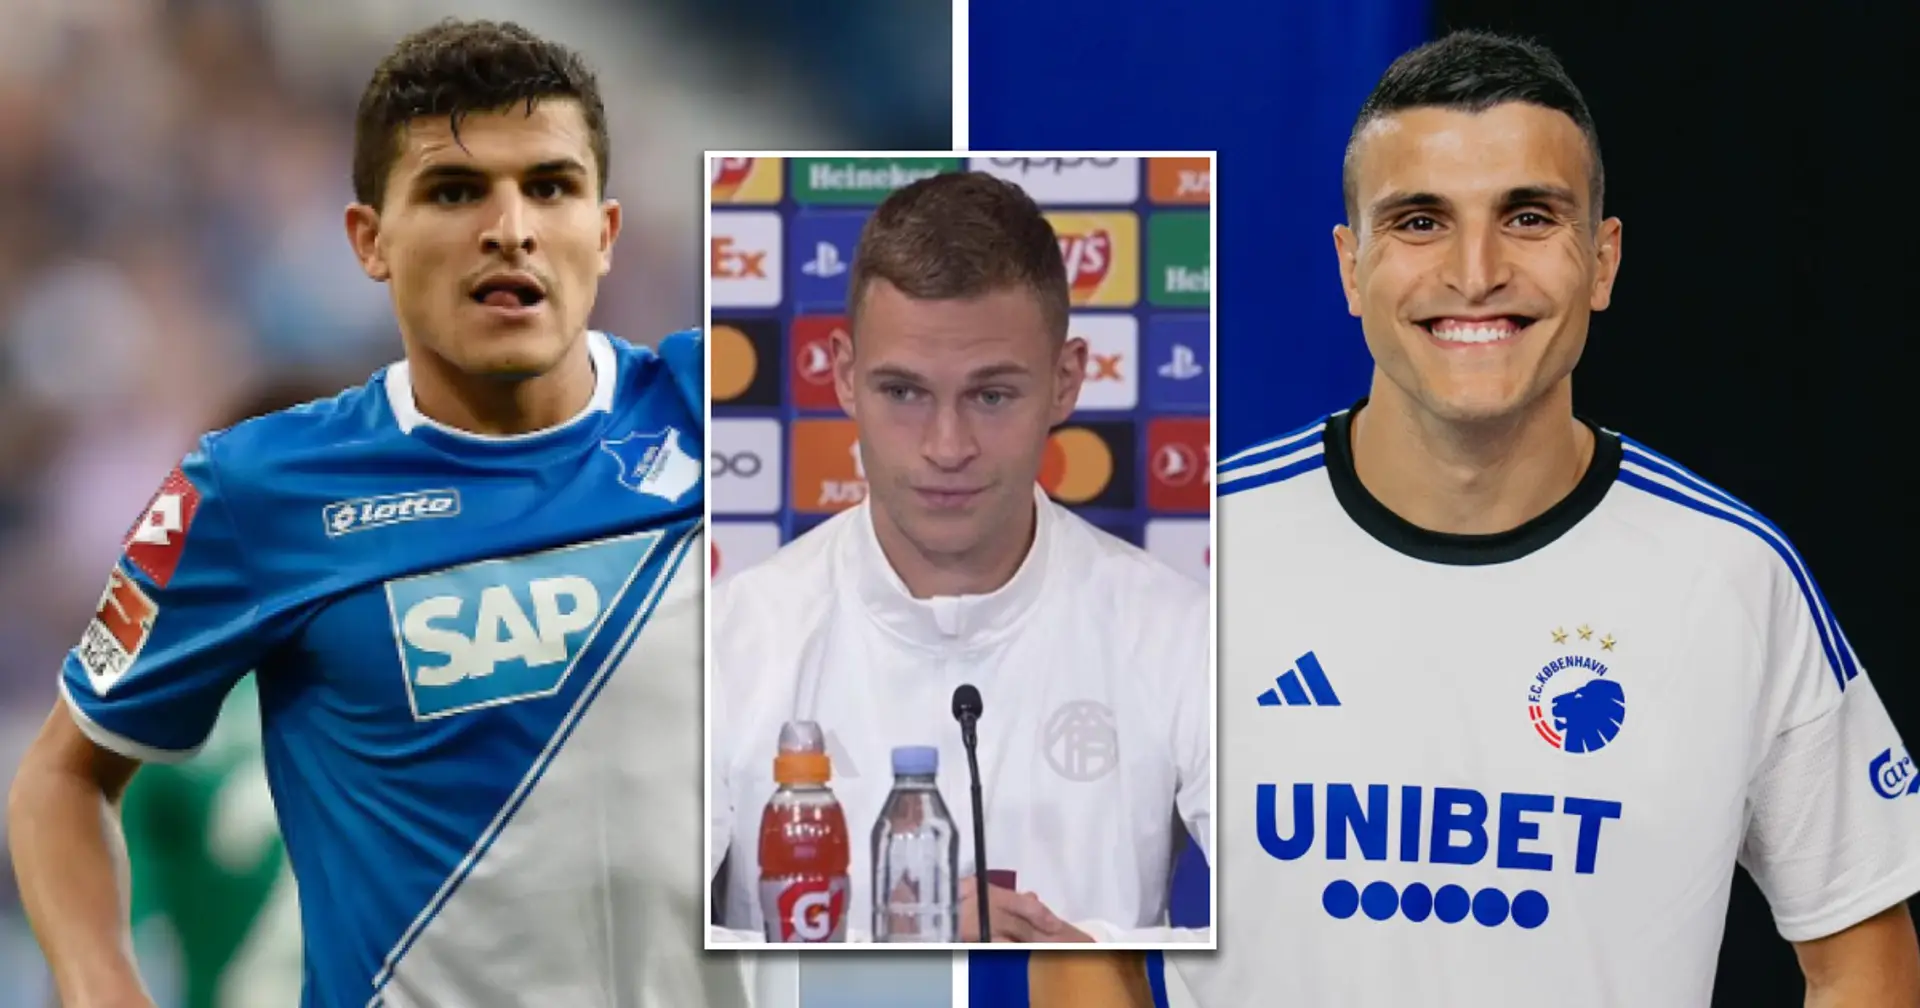 'We know Mohamed Elyounoussi': Joshua Kimmich confuses Copenhagen player with his cousin 